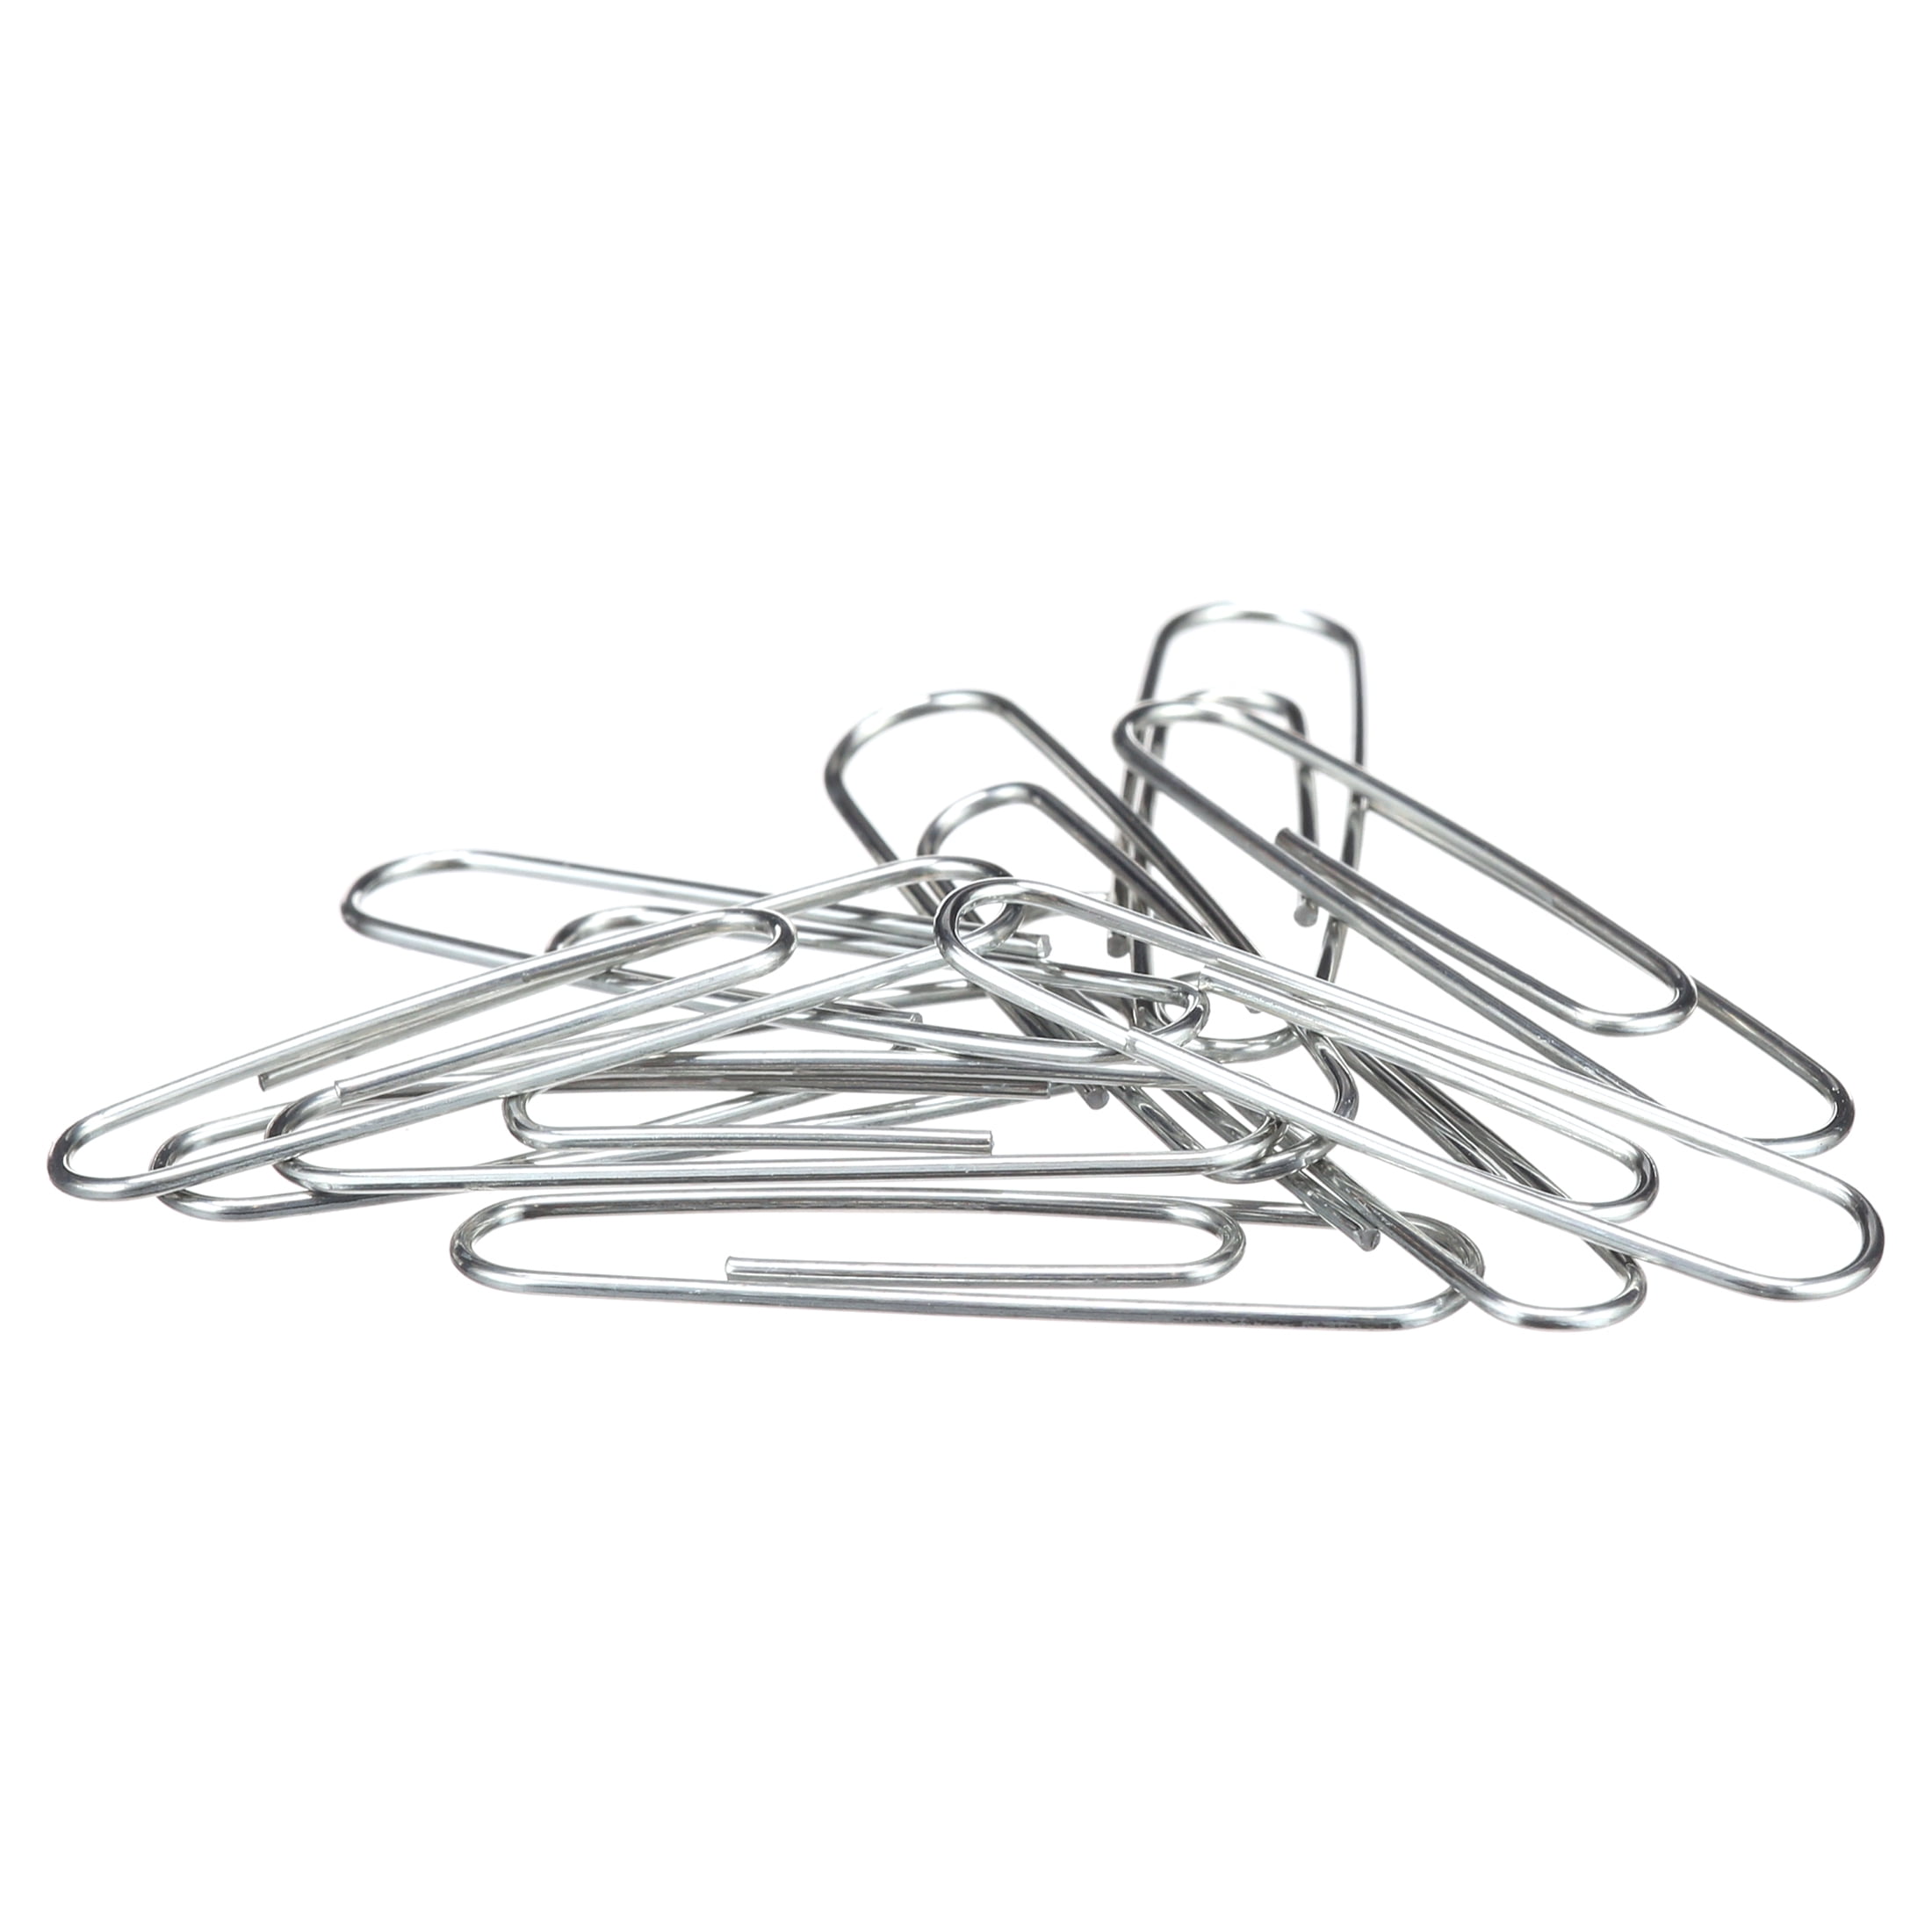 Basics No. 1 Paper Clips, Smooth, 1000 Count (10 Pack of 100), Silver